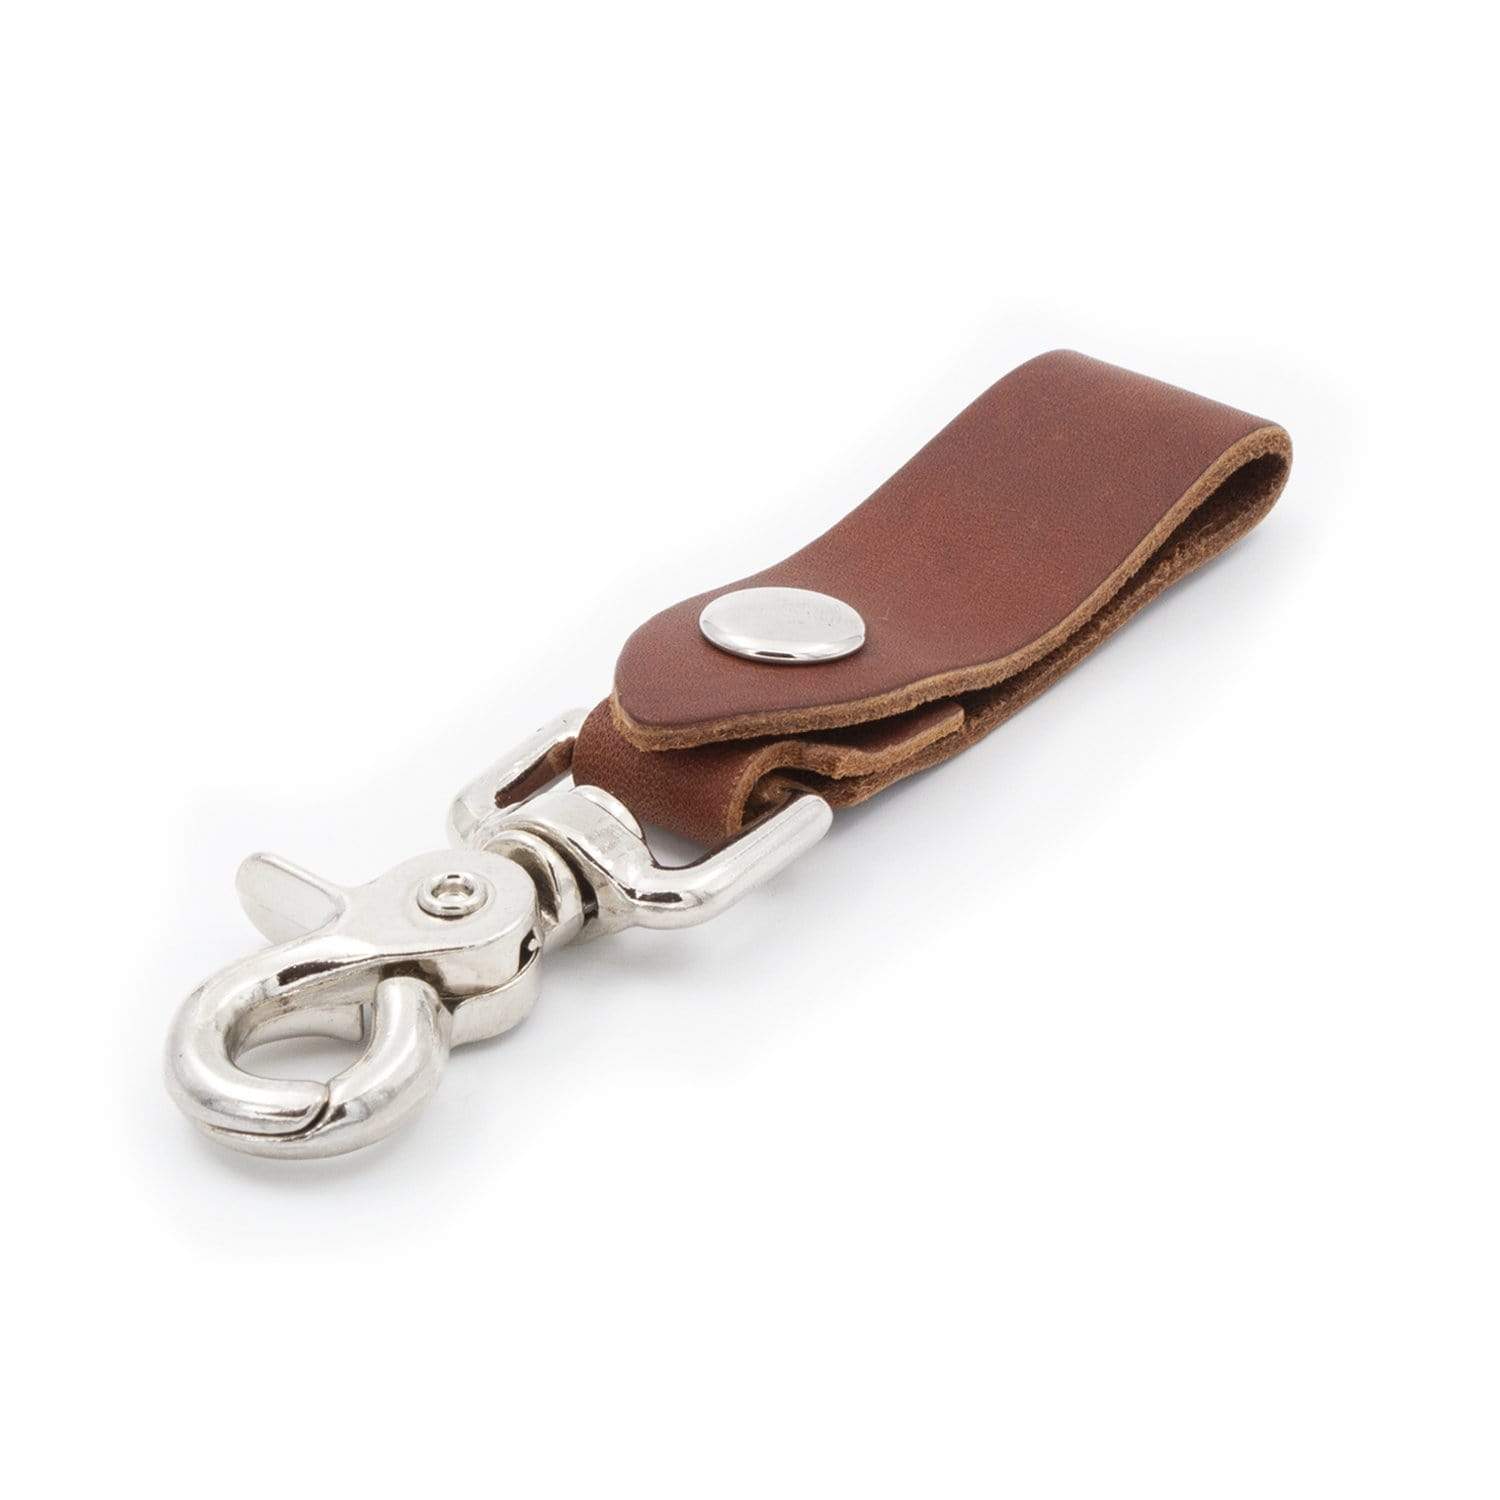 Small Leather Key Wallet, Key Holder with Hanging Buckle Hooks for